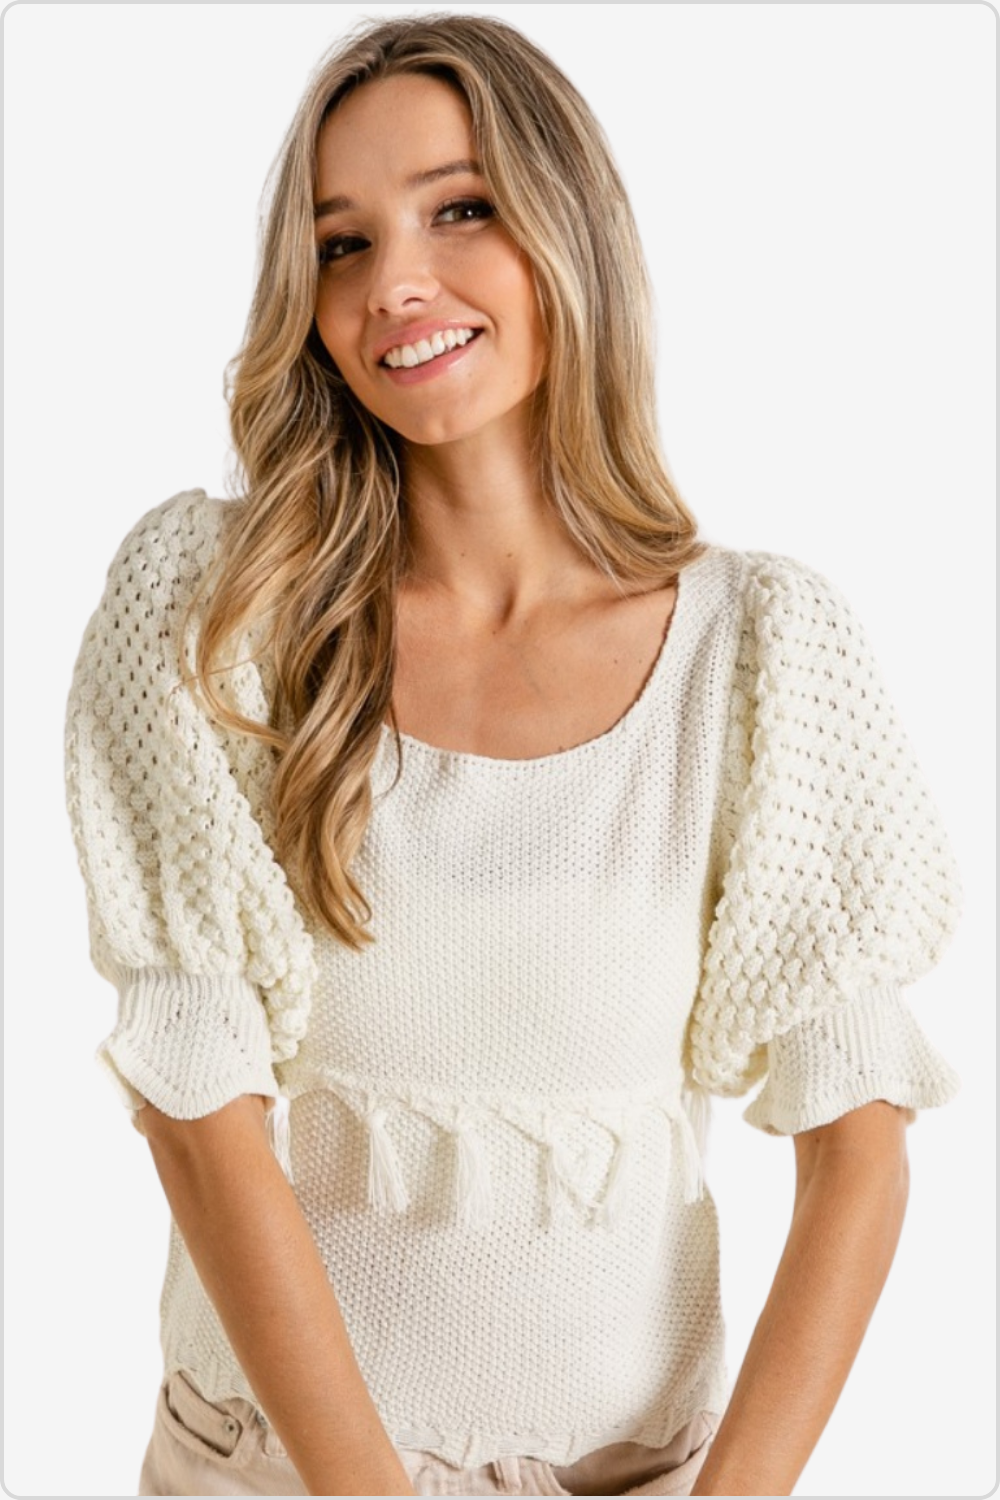 Smiling woman wearing a boho cream knit sweater with fringe trim 